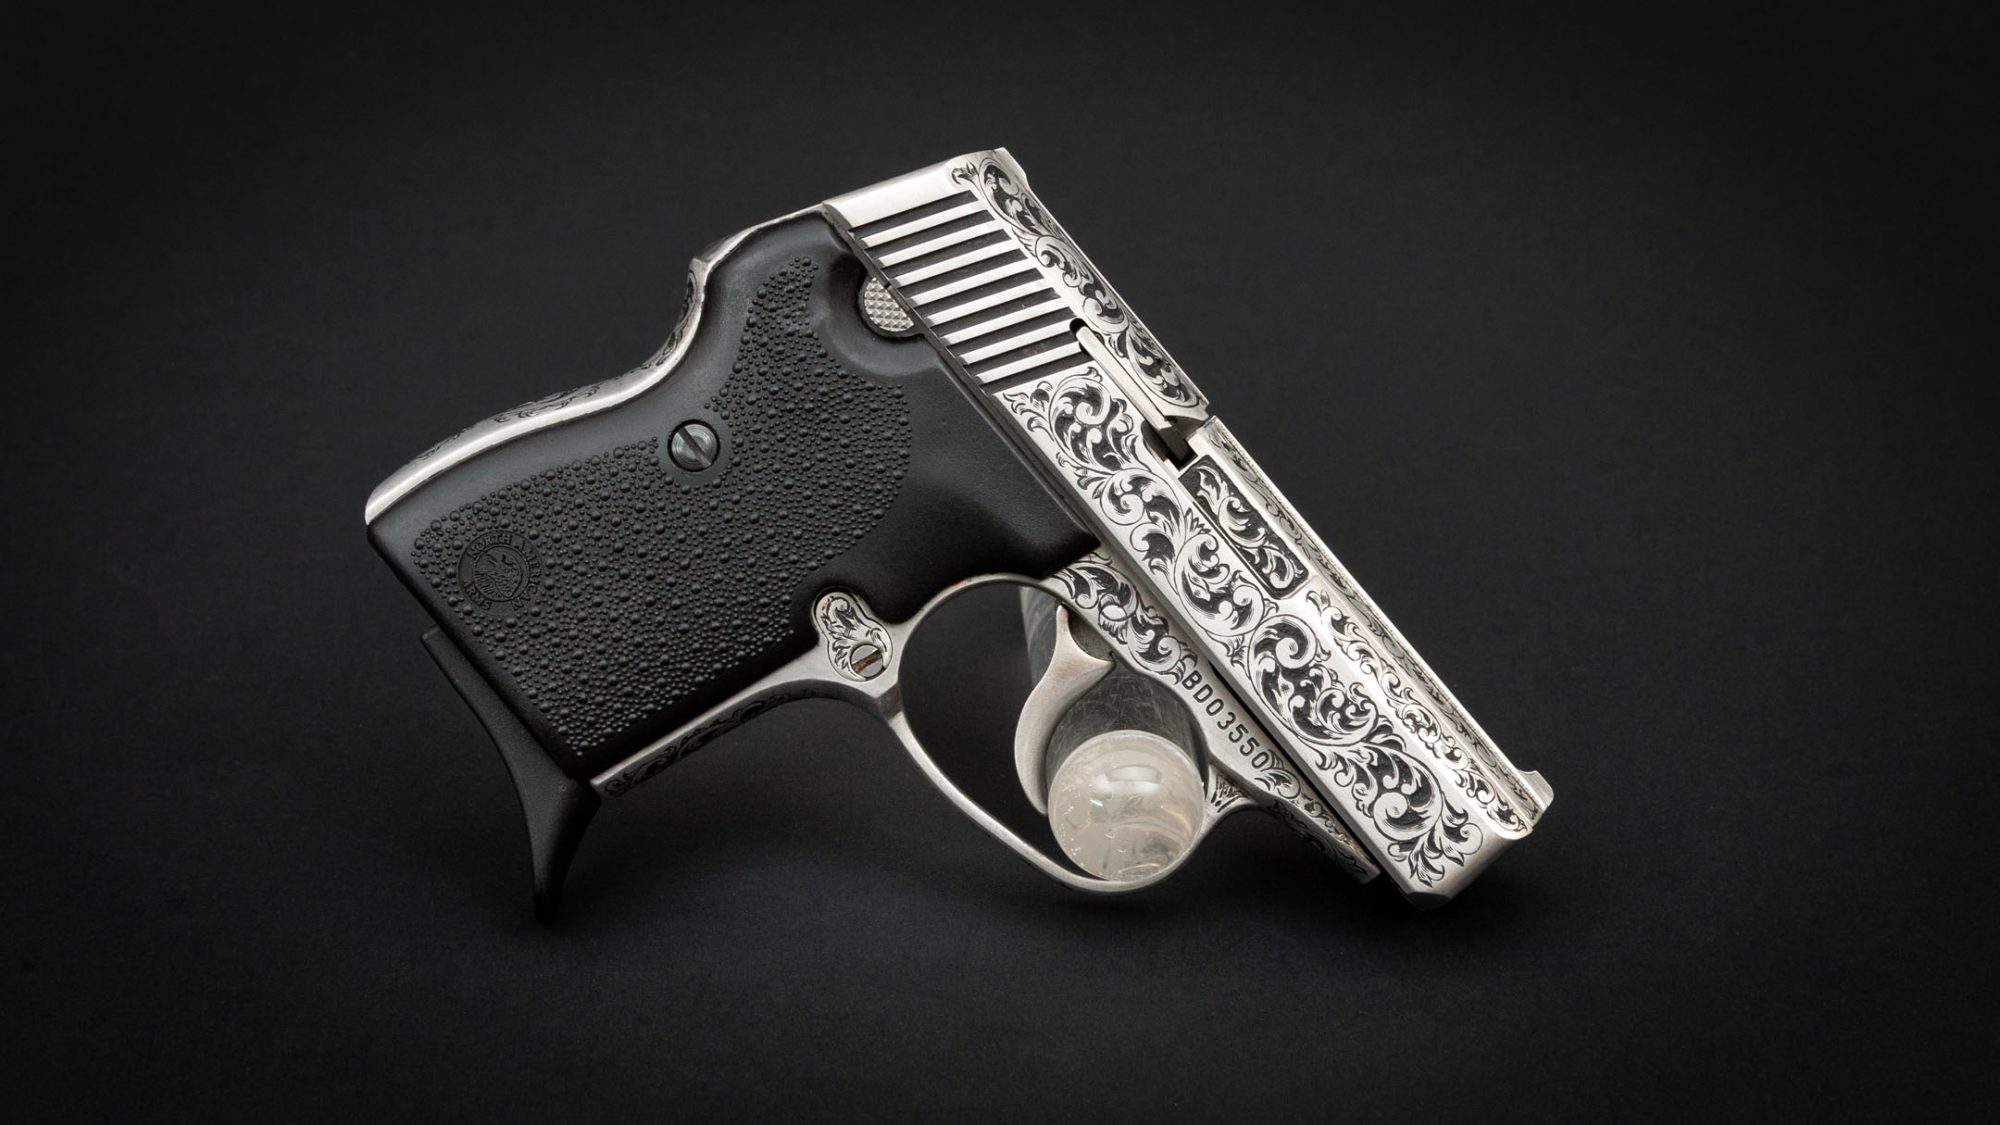 North American Arms Guardian Model in .380 ACP, for sale by Turnbull Restoration Co. of Bloomfield, NY